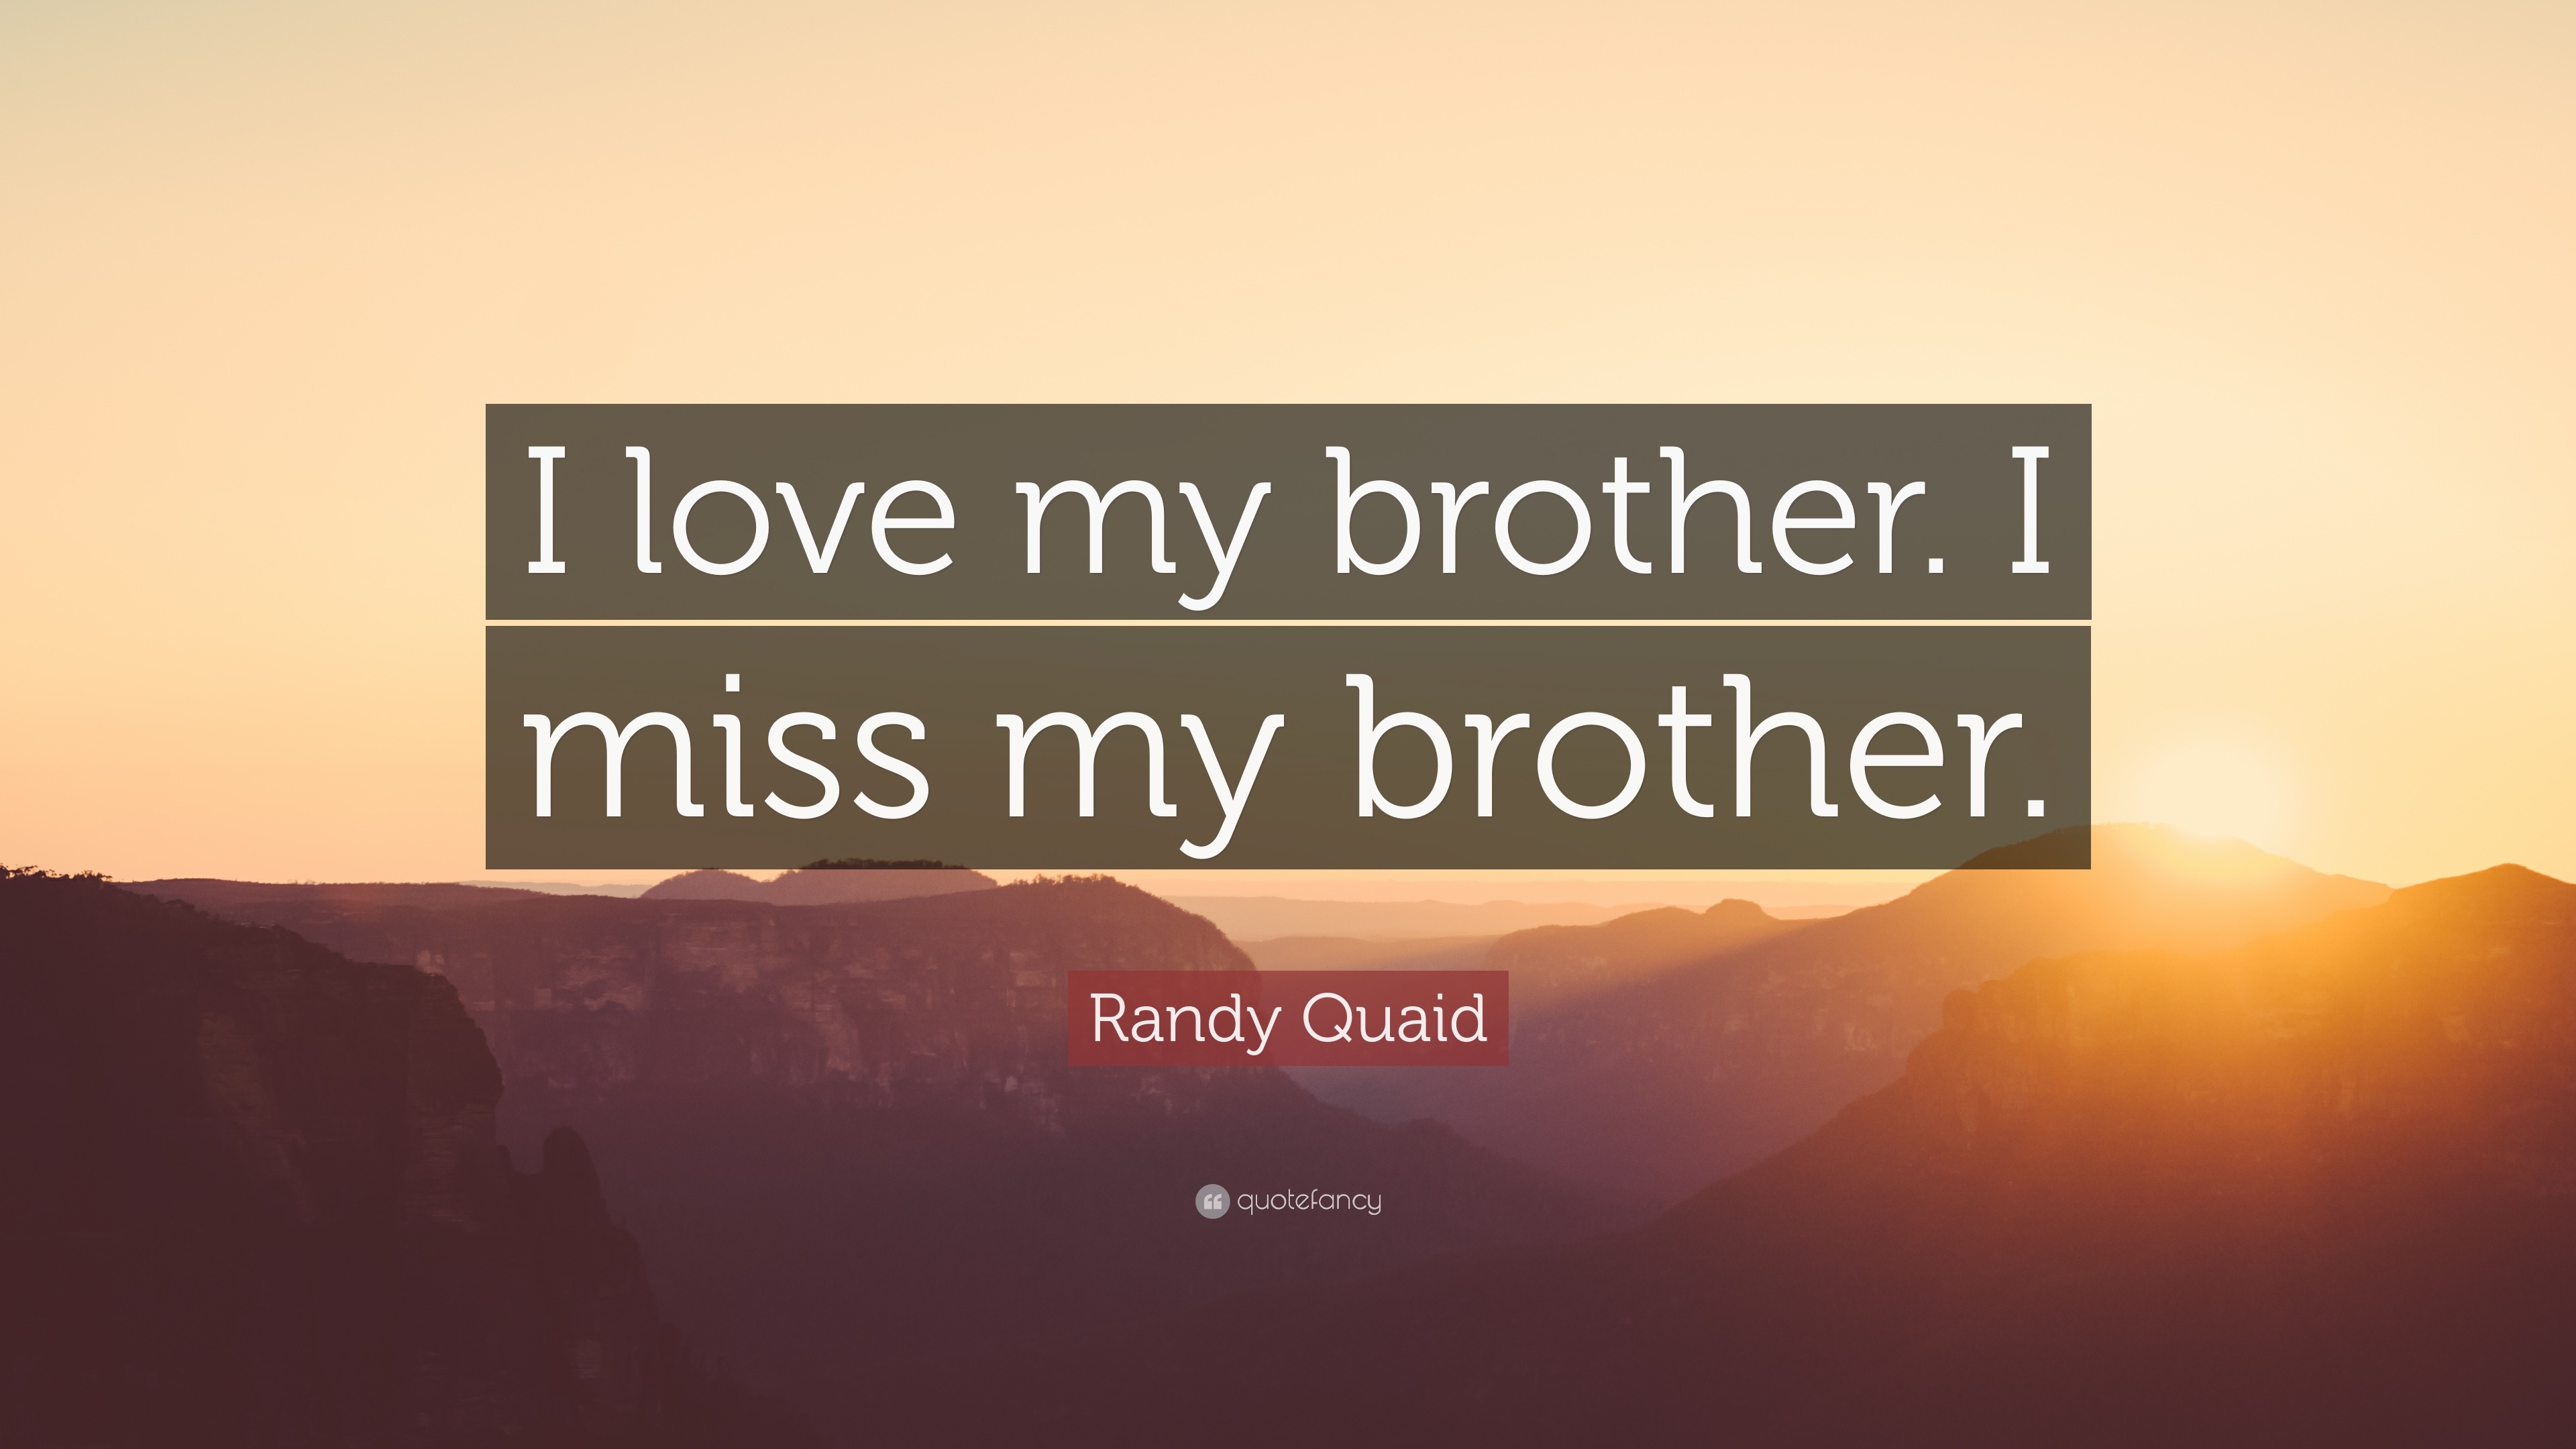 Randy Quaid Quote “I love my brother I miss my brother ”